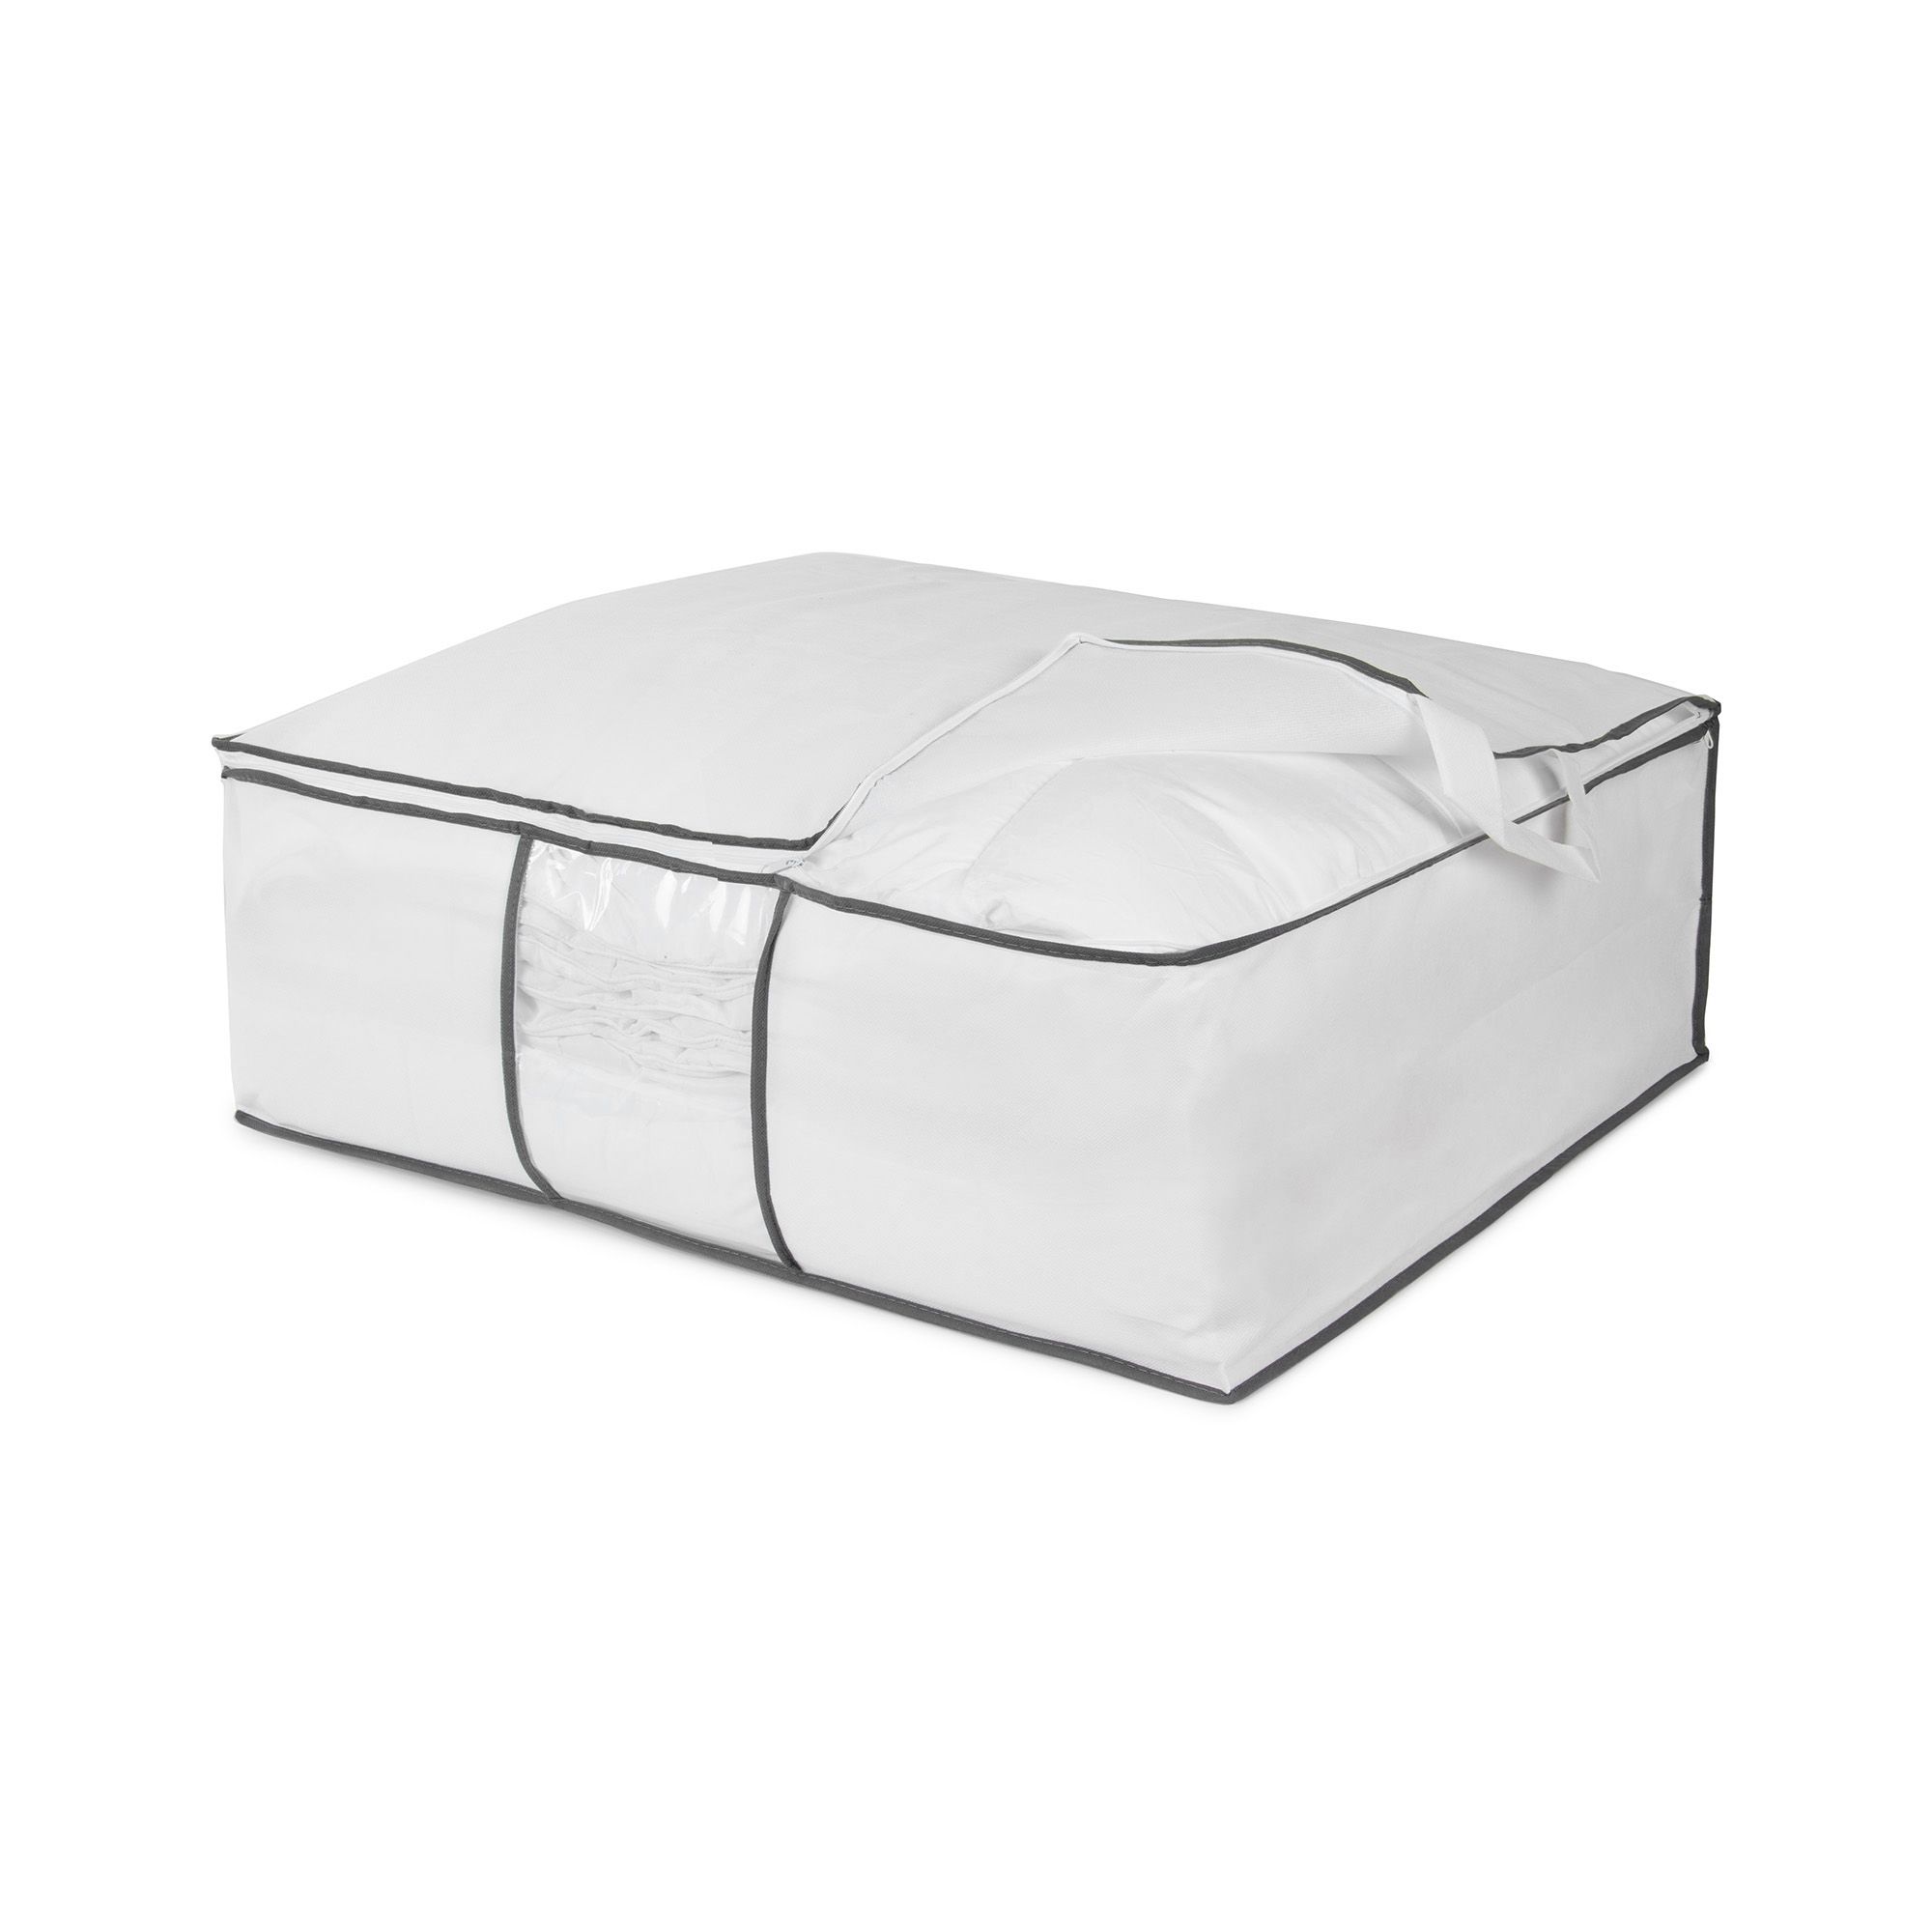 Compactor Underbed Storage Bag, Underwear Organizer, Extra Flat, Made of  Non-Woven Polypropylene, Zipper Closure and Two Handles for Easy Carrying,  White / Gray - LIFE - Maison Method